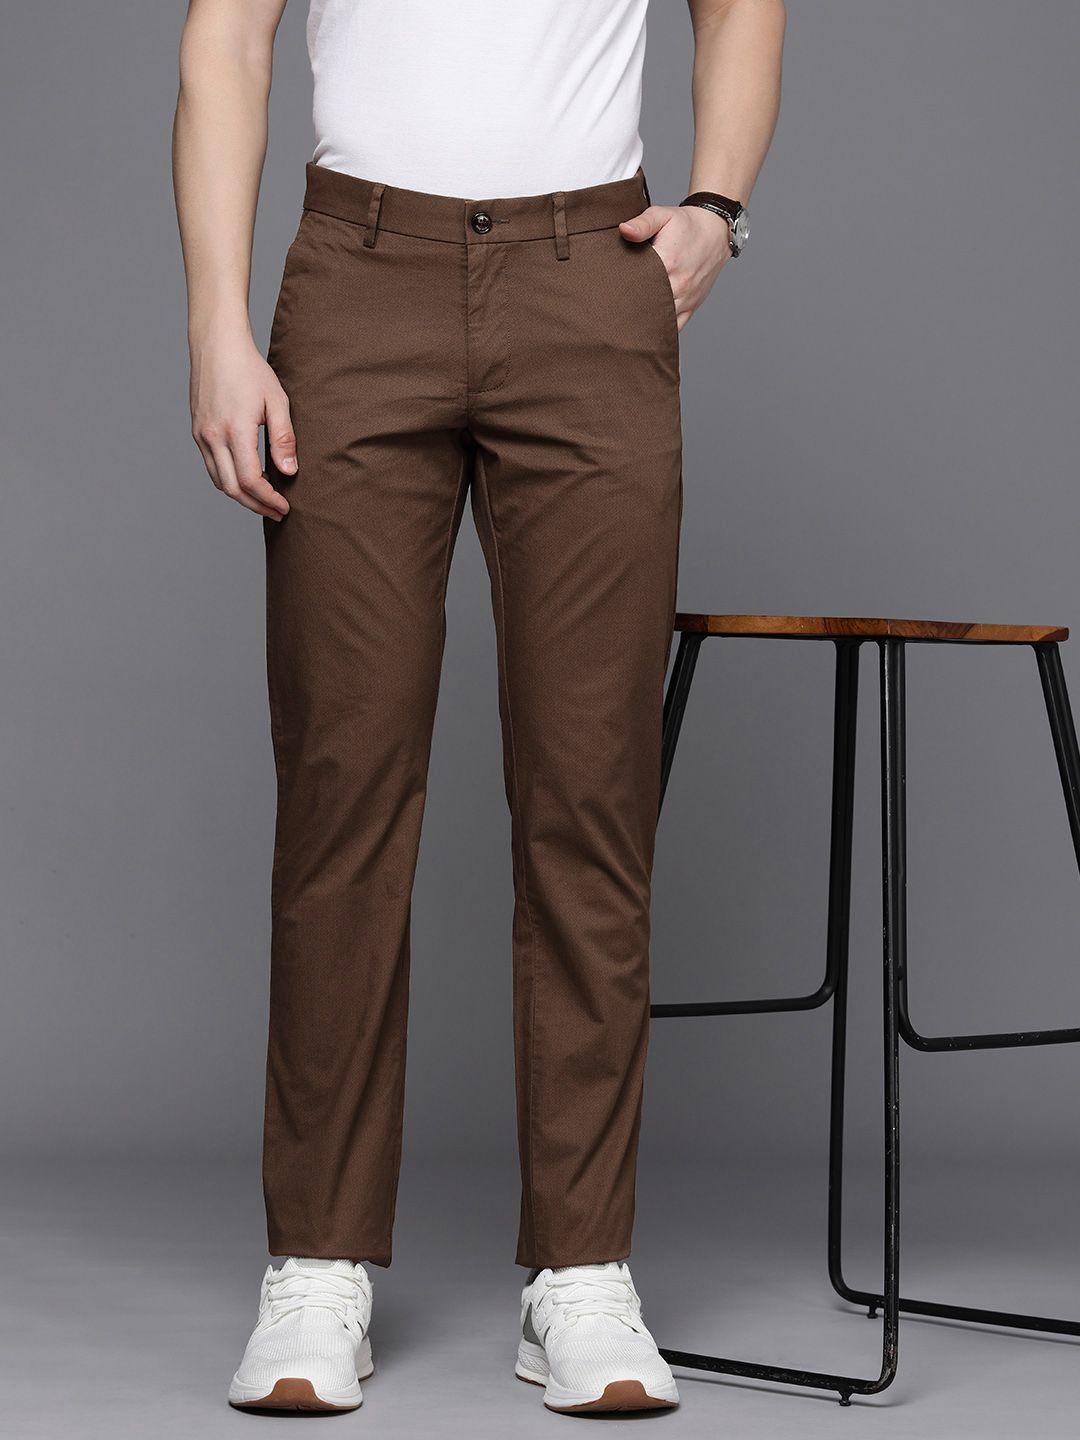 allen solly men printed slim fit mid-rise trousers